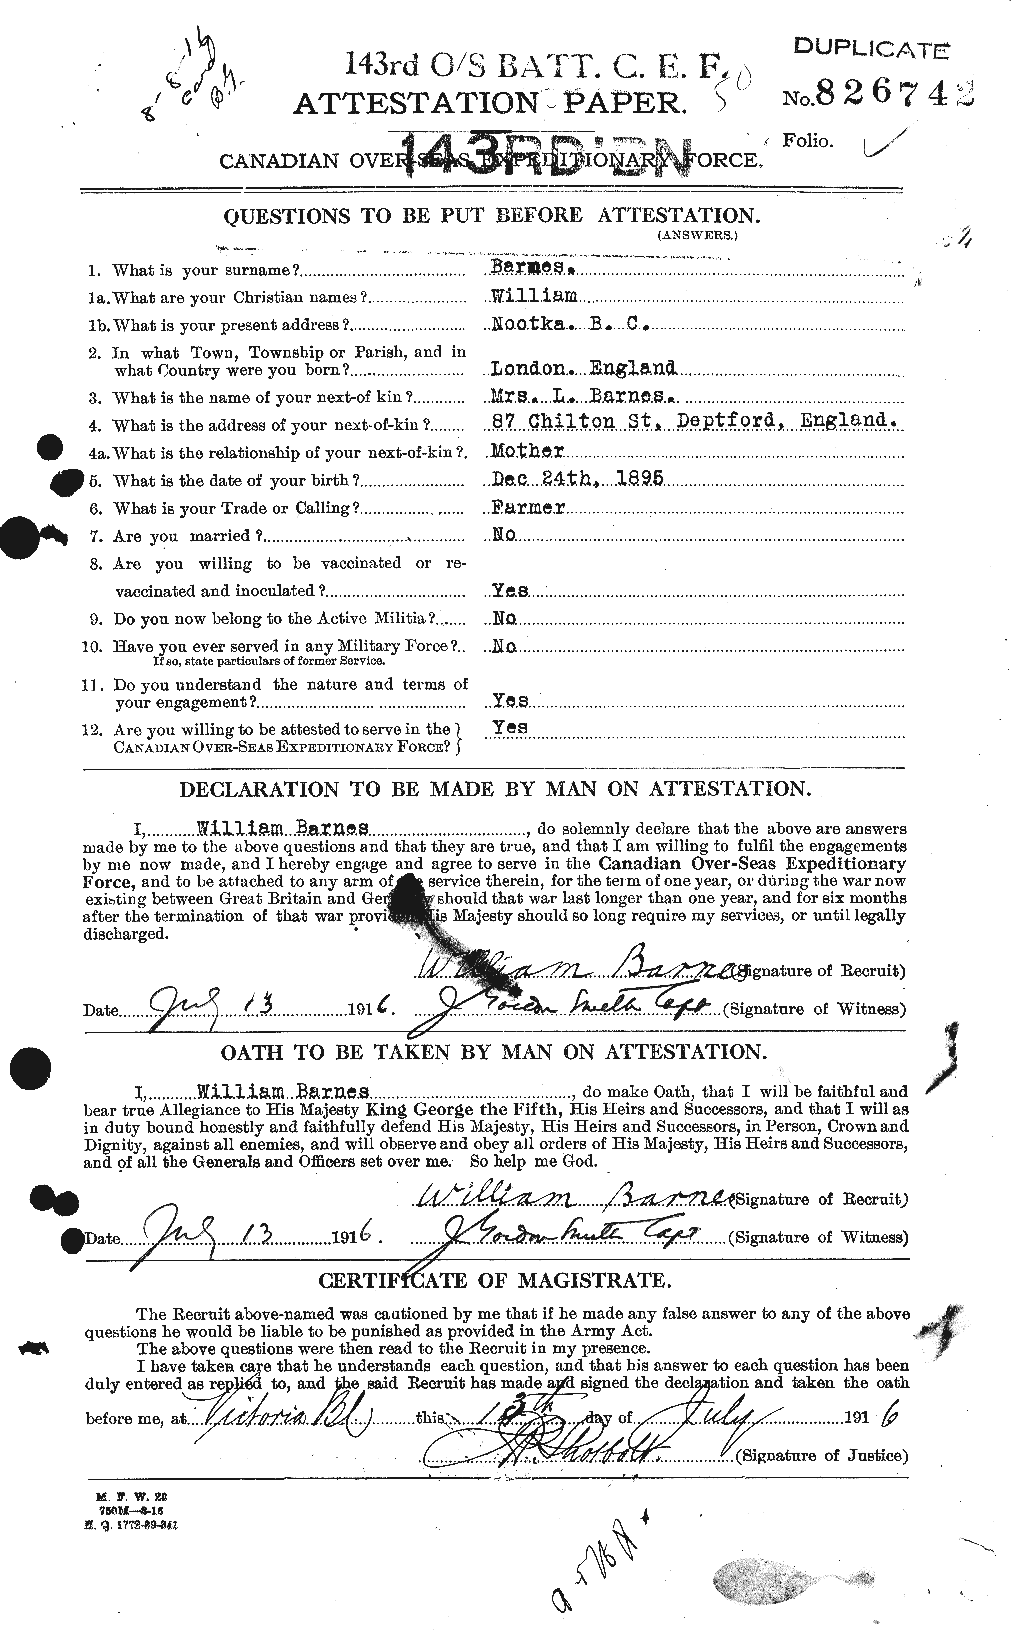 Personnel Records of the First World War - CEF 227315a